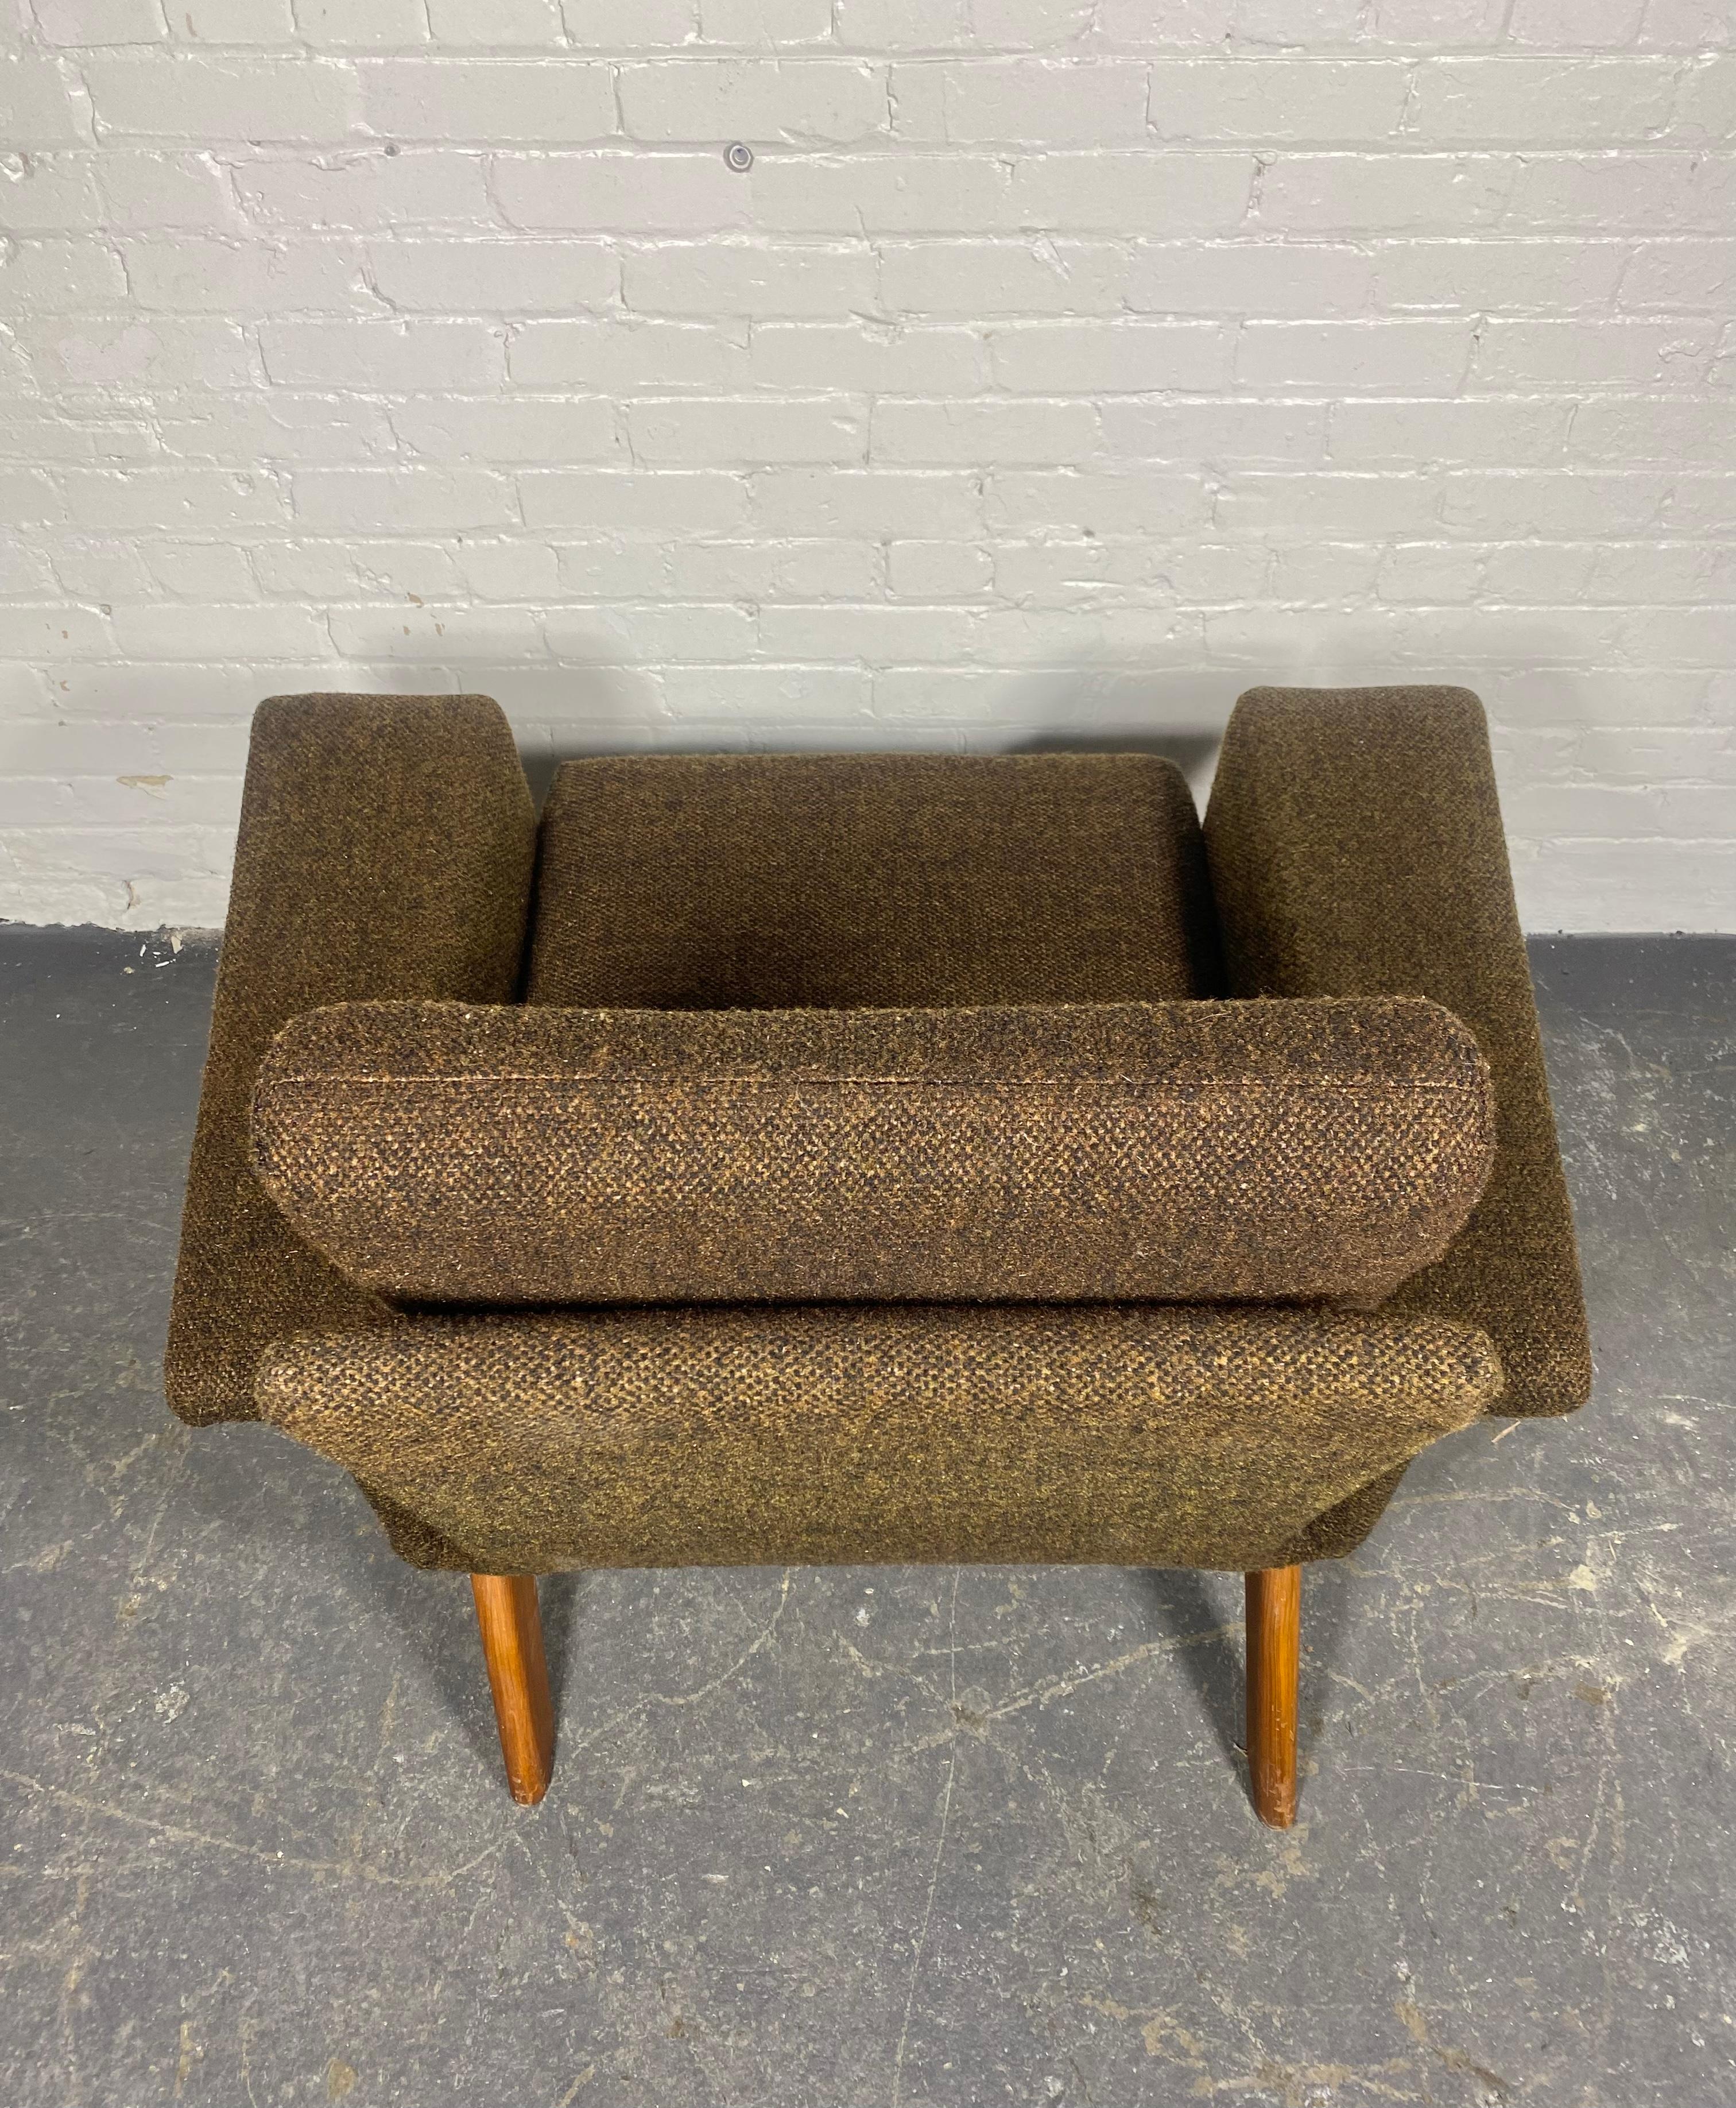 Dramatic Modernist Lounge Chair by Adrian Pearsall.Sculptural Walnut Base. 1